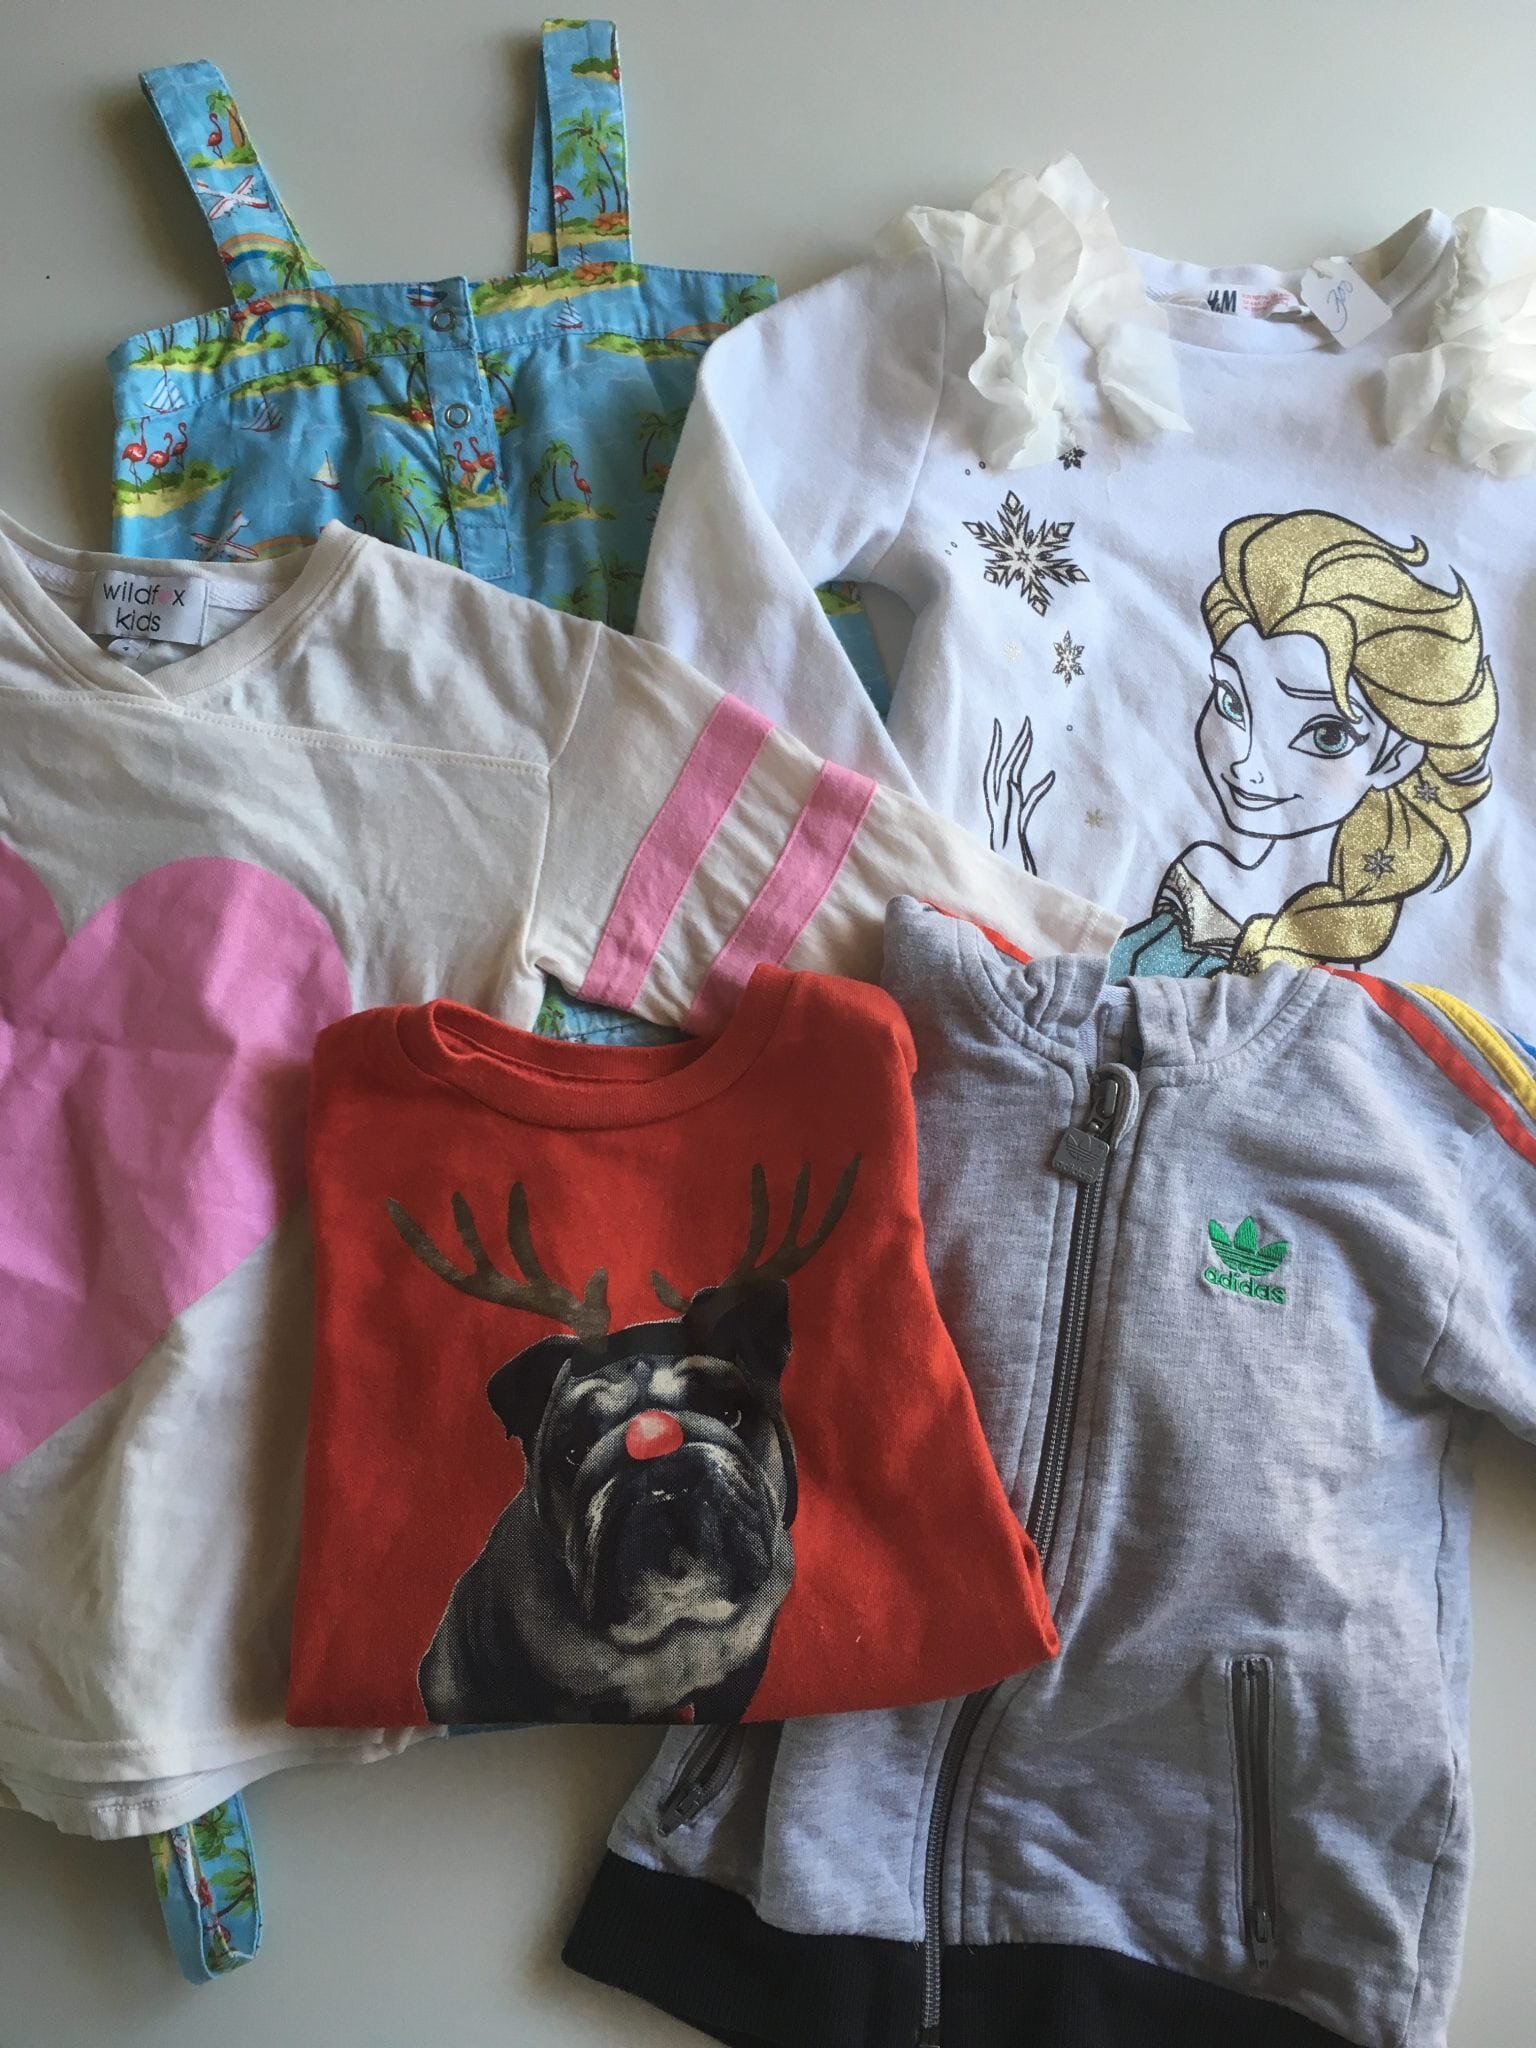 LA Parent—Where to Buy, Sell or Trade Your Kids’ Clothes in L.A.